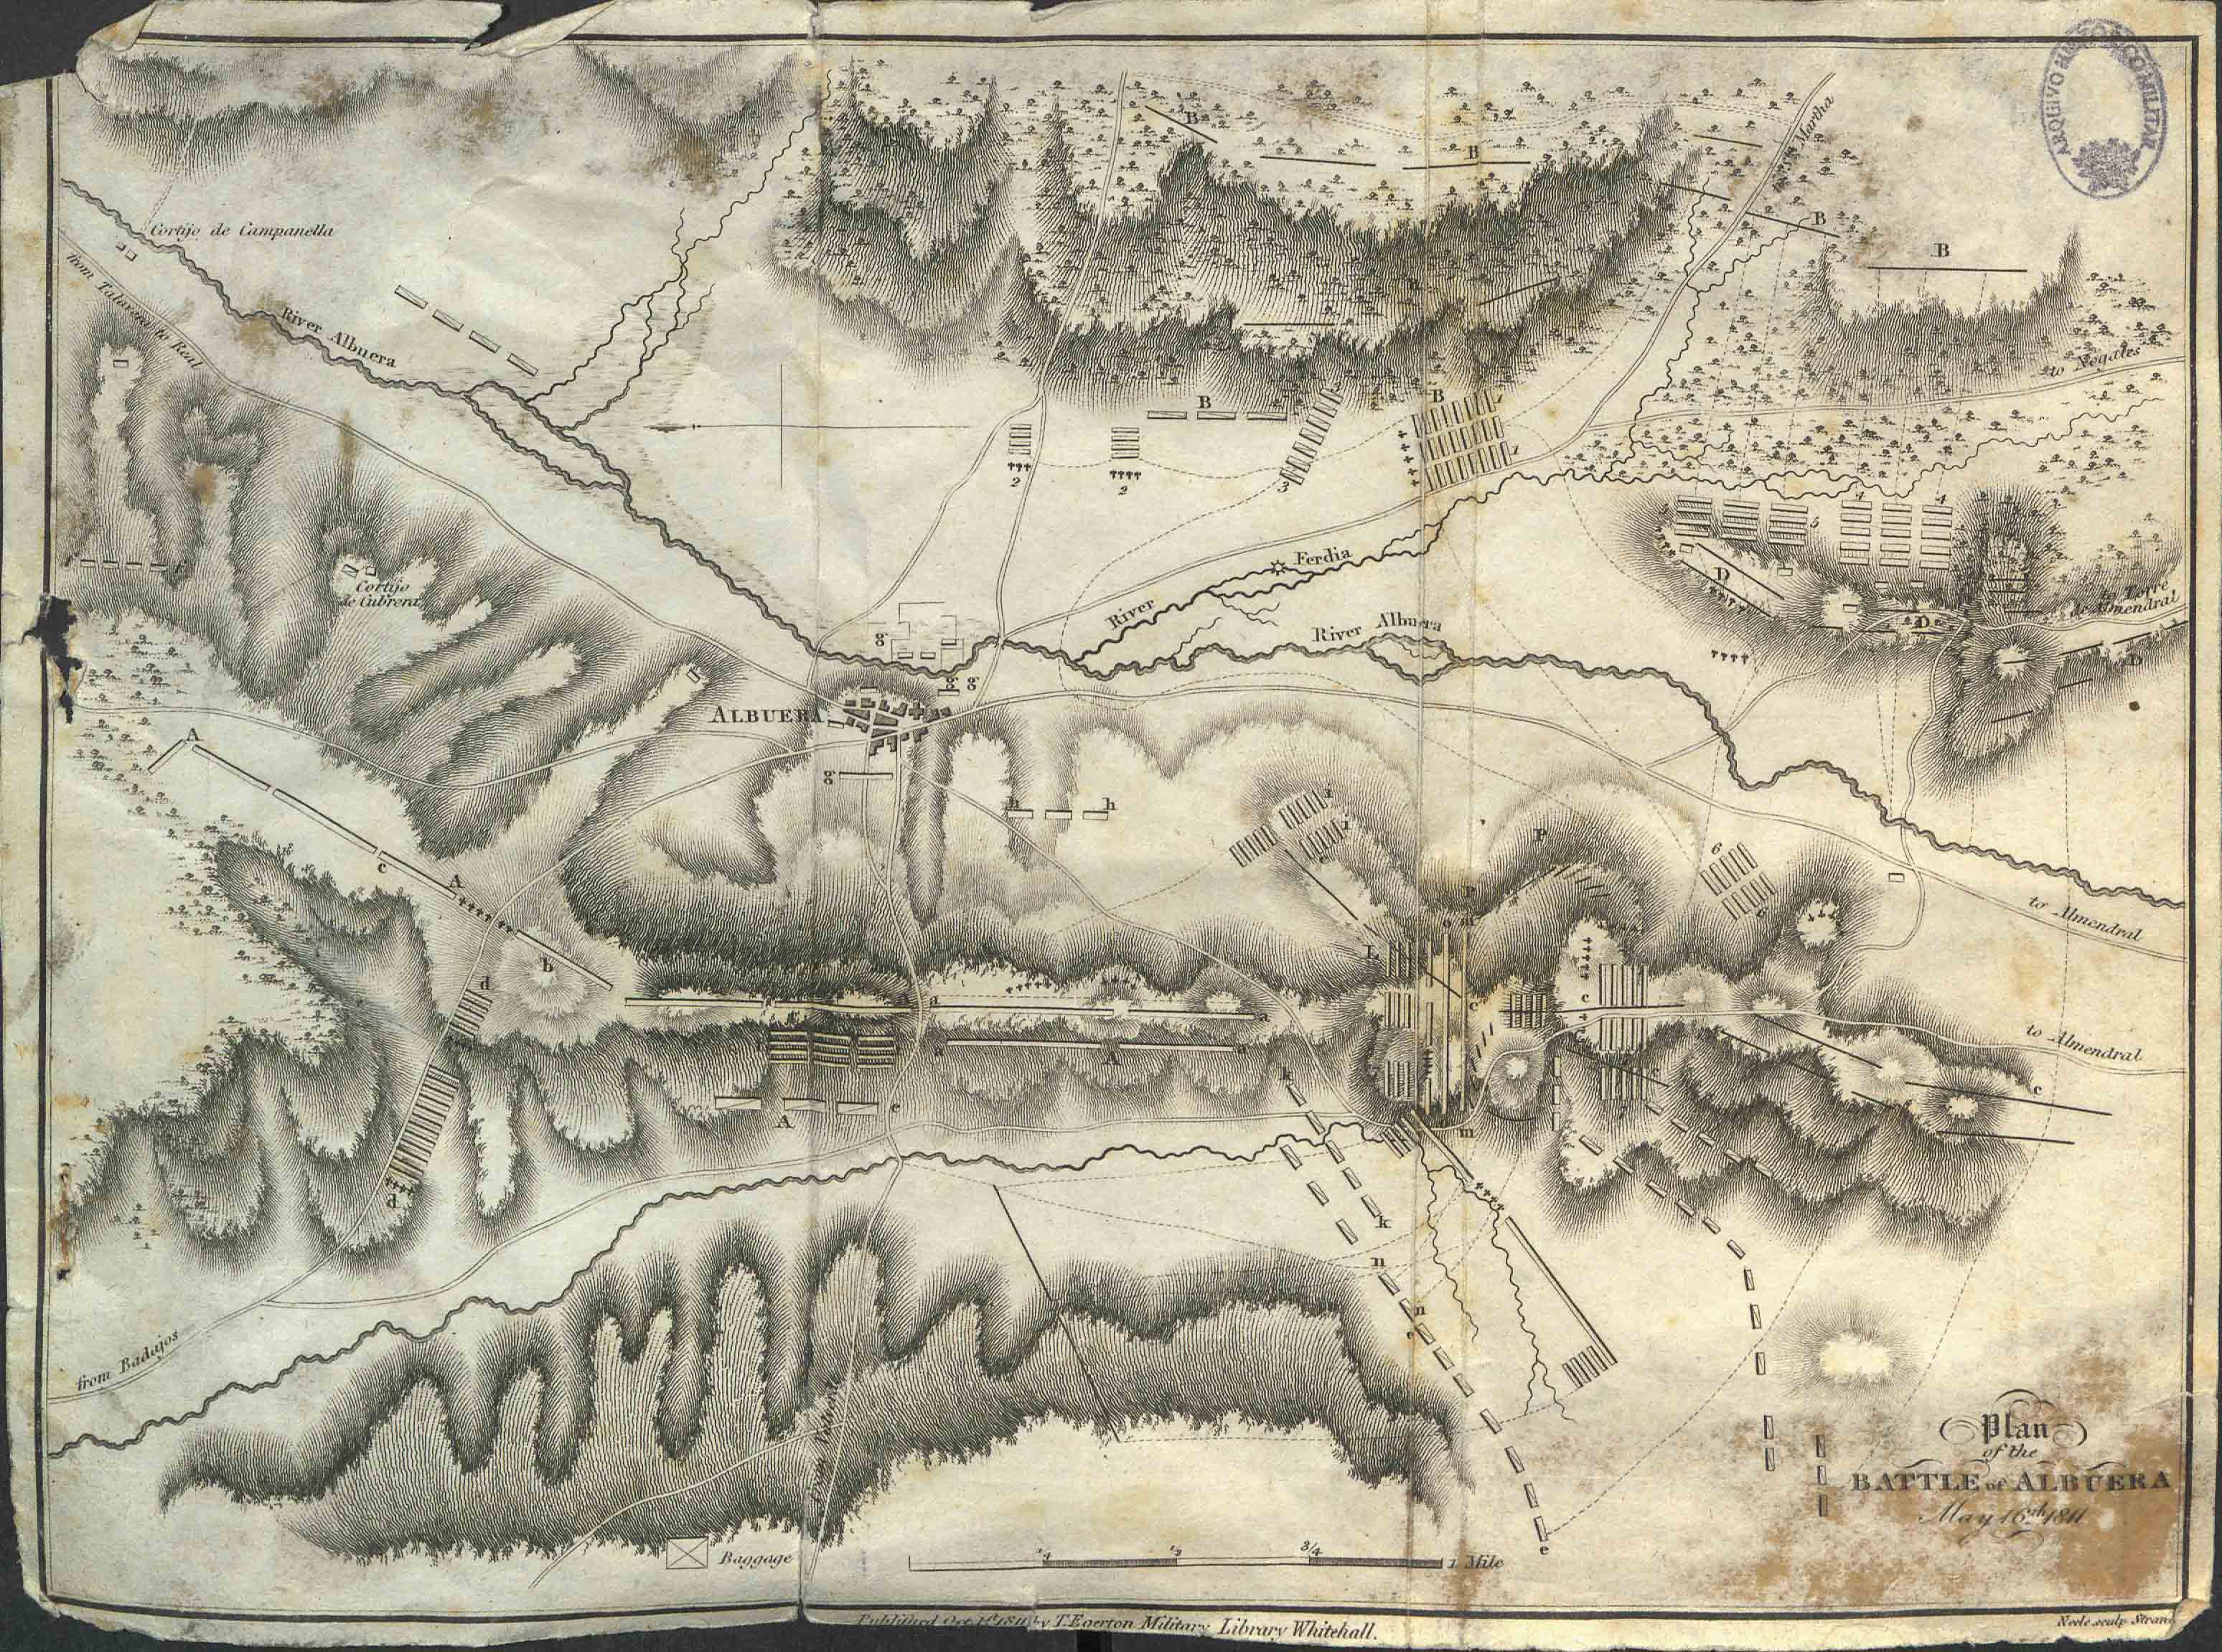 Plan of the battle of Albuera